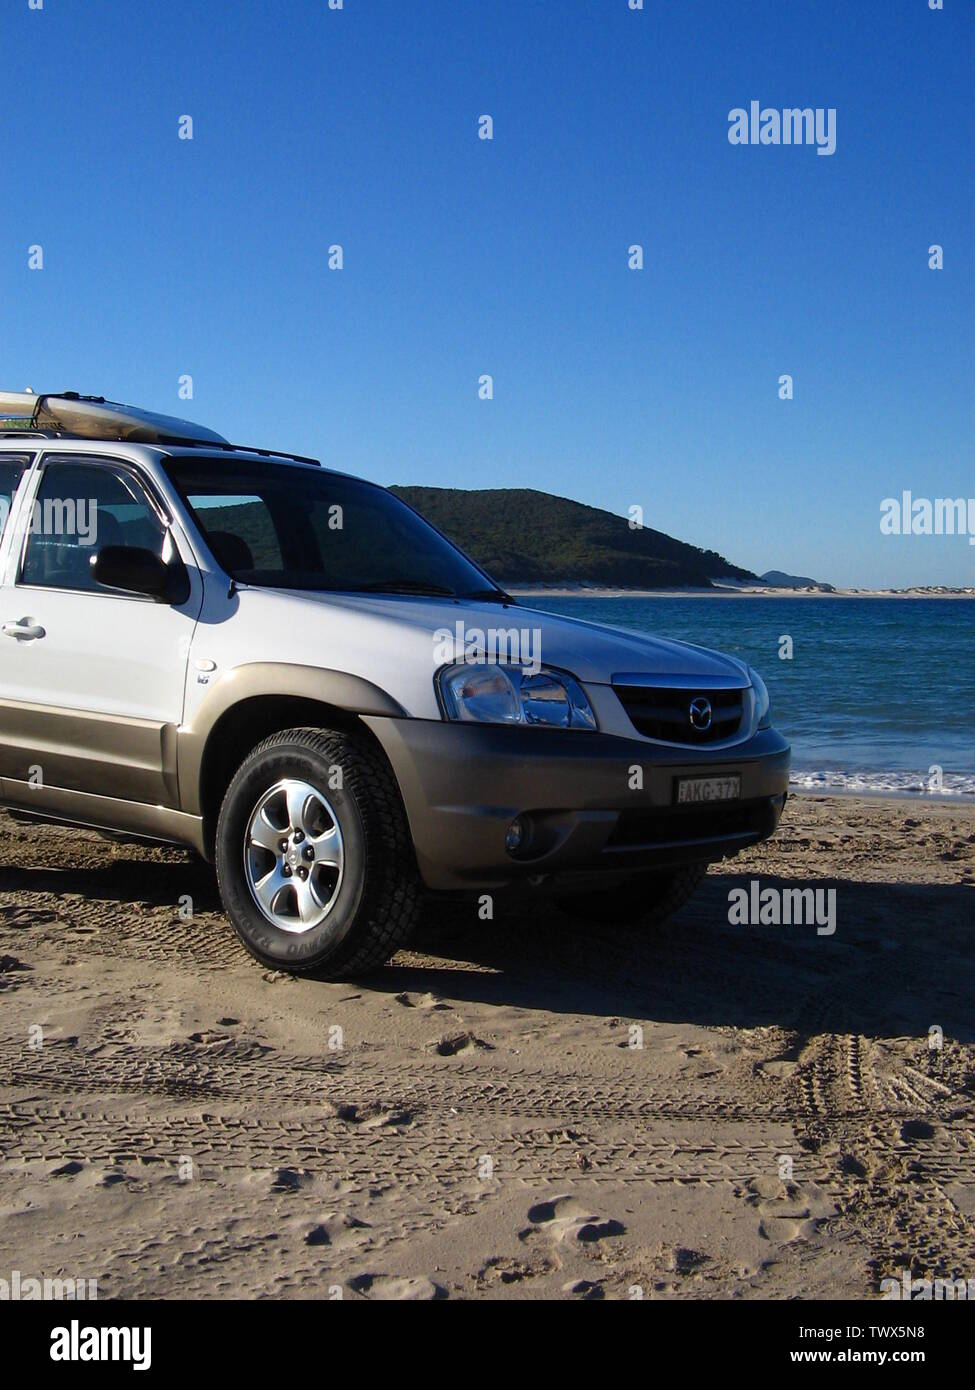 2001 Mazda Tribute Classic 3.0 litre V6, photographed at Nelson Bay, New South Wales, Australia.; 24 February 2007 (taken) 18 November 2007 (original upload date); Transferred from en.pedia to Commons.; Tribby030144 at English pedia; Stock Photo